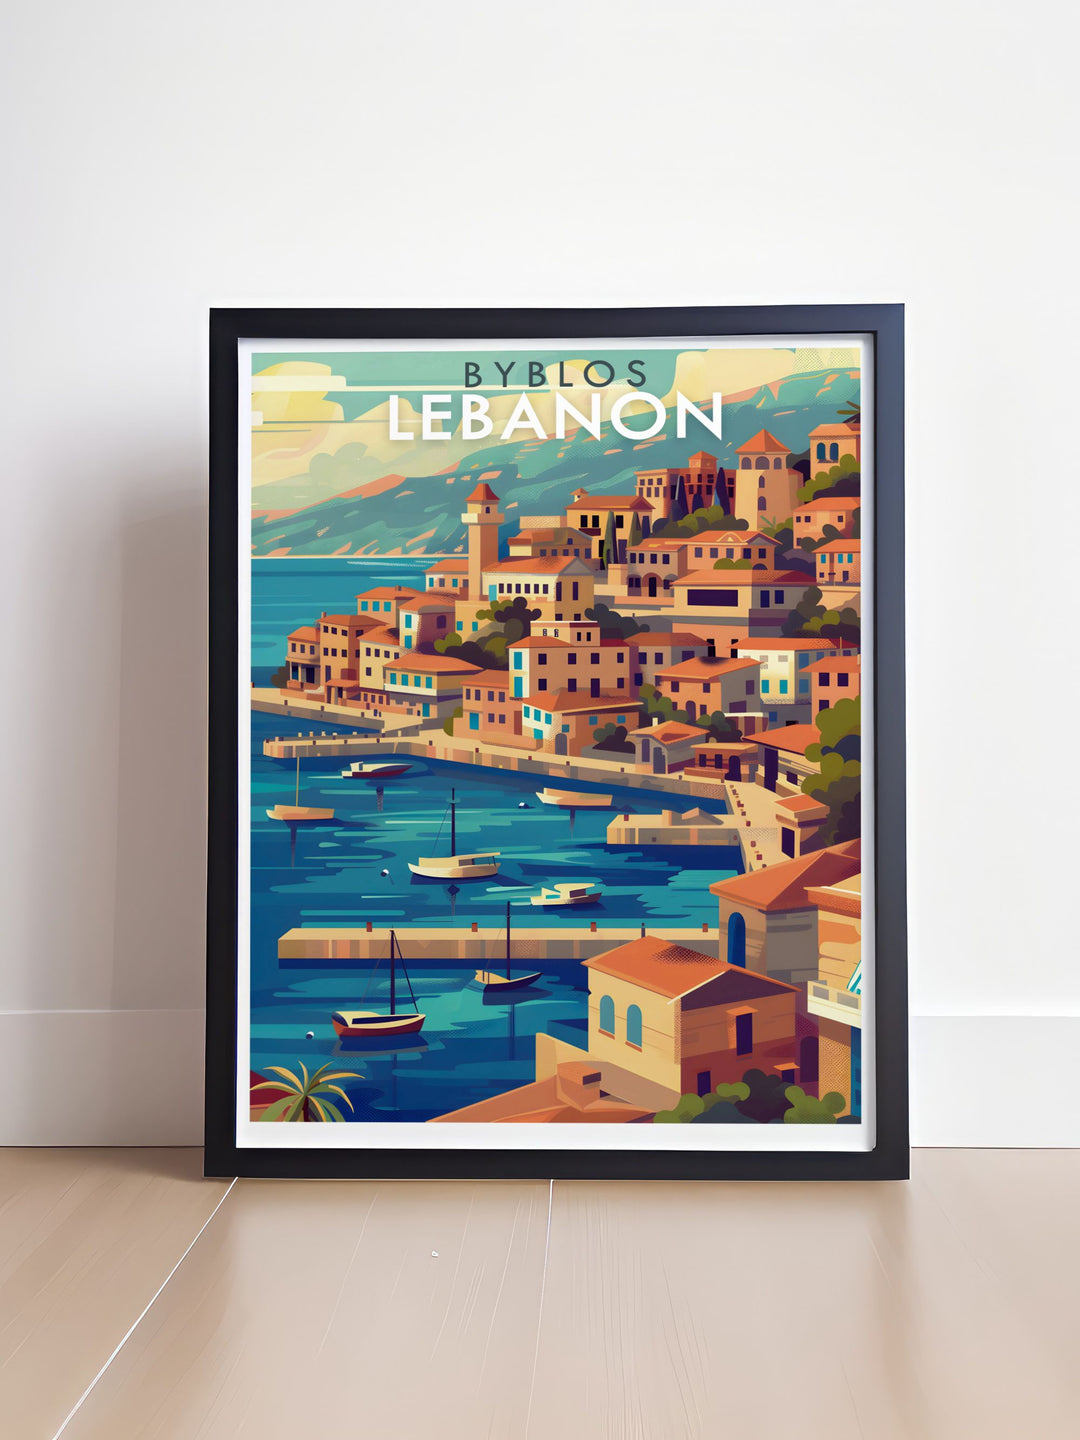 Beirut Photography capturing the dynamic spirit of the city alongside Byblos prints that depict the historical and Mediterranean allure of one of the worlds oldest cities ideal for anniversary gifts